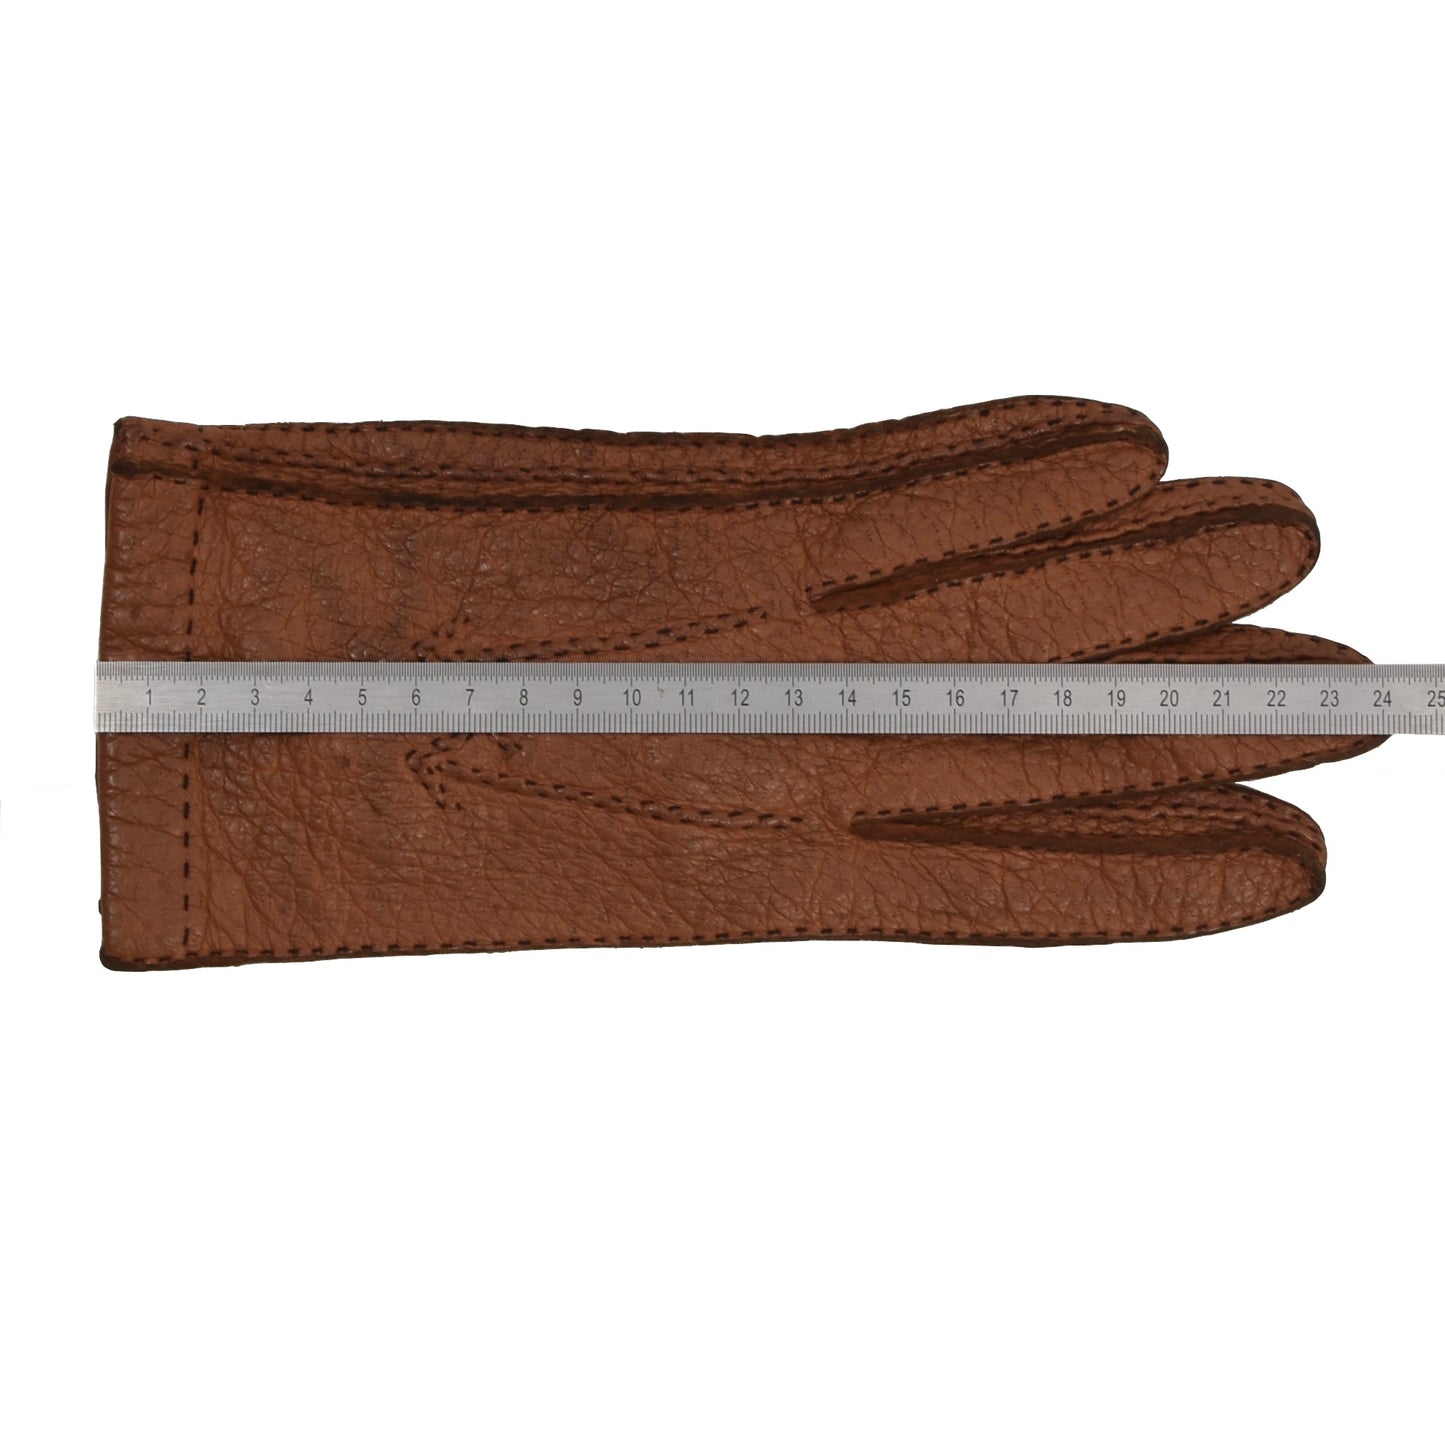 Unlined Peccary Gloves  - Rust Brown